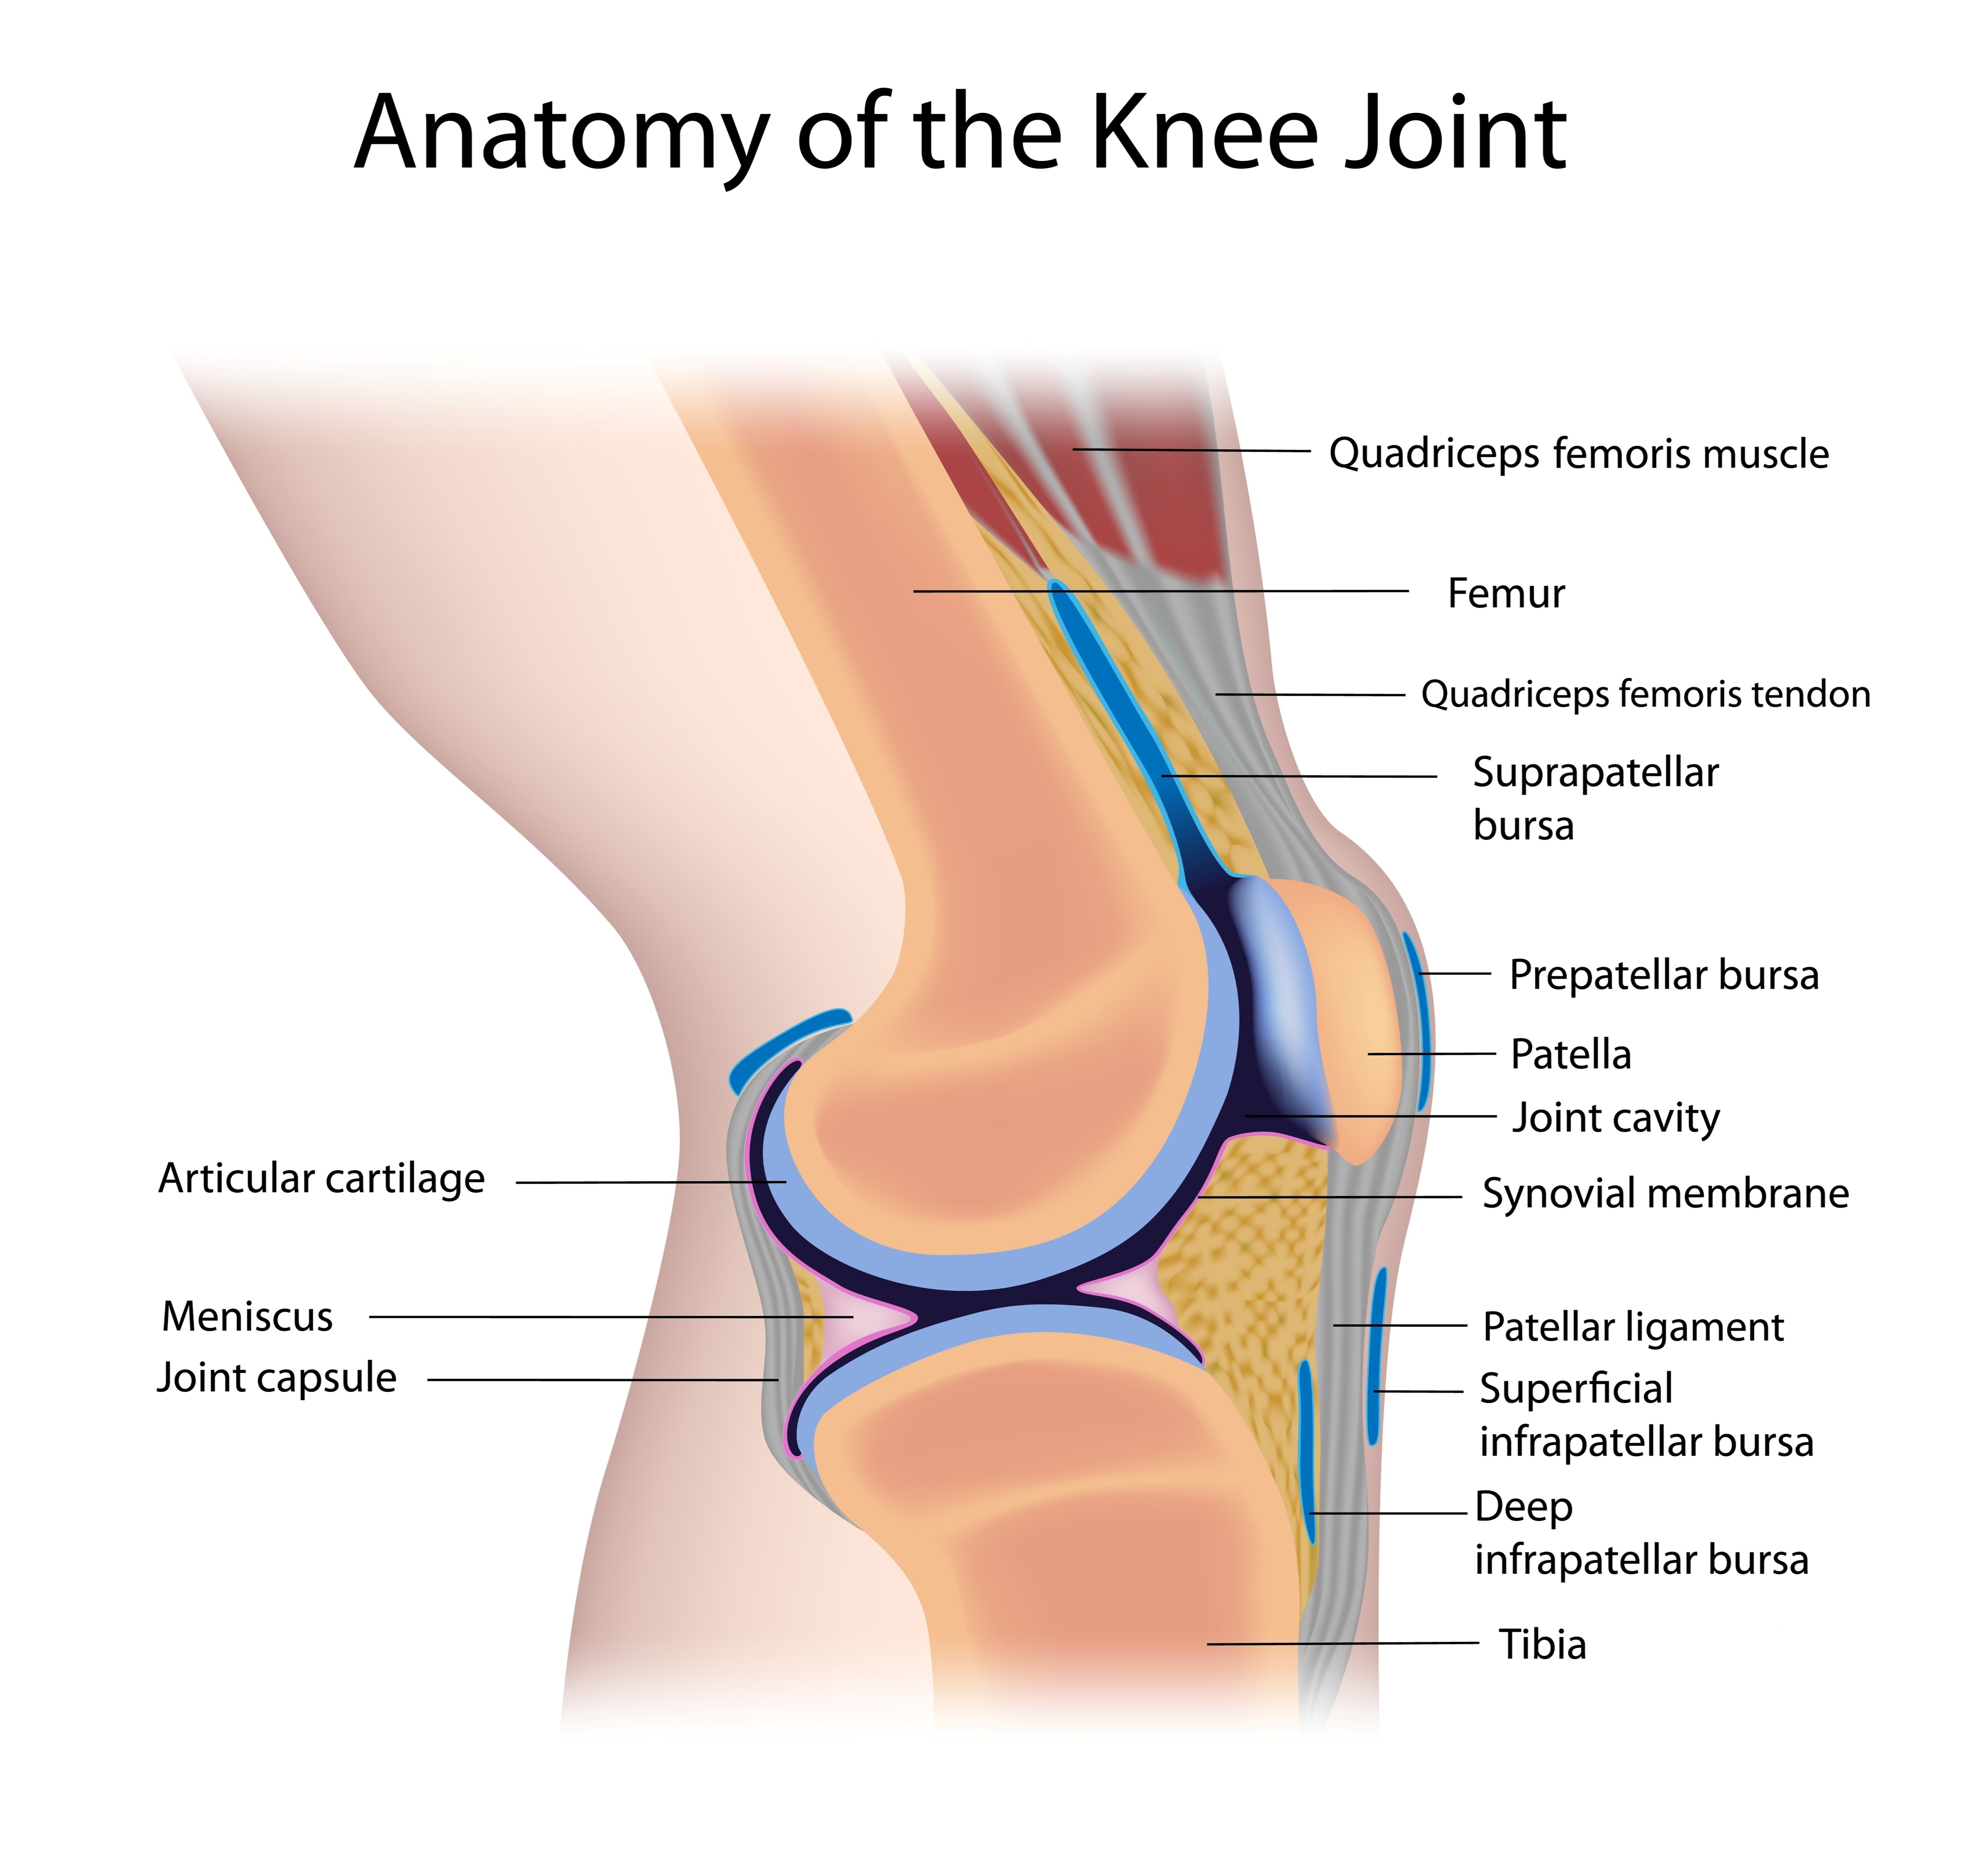 The knee has six main components: